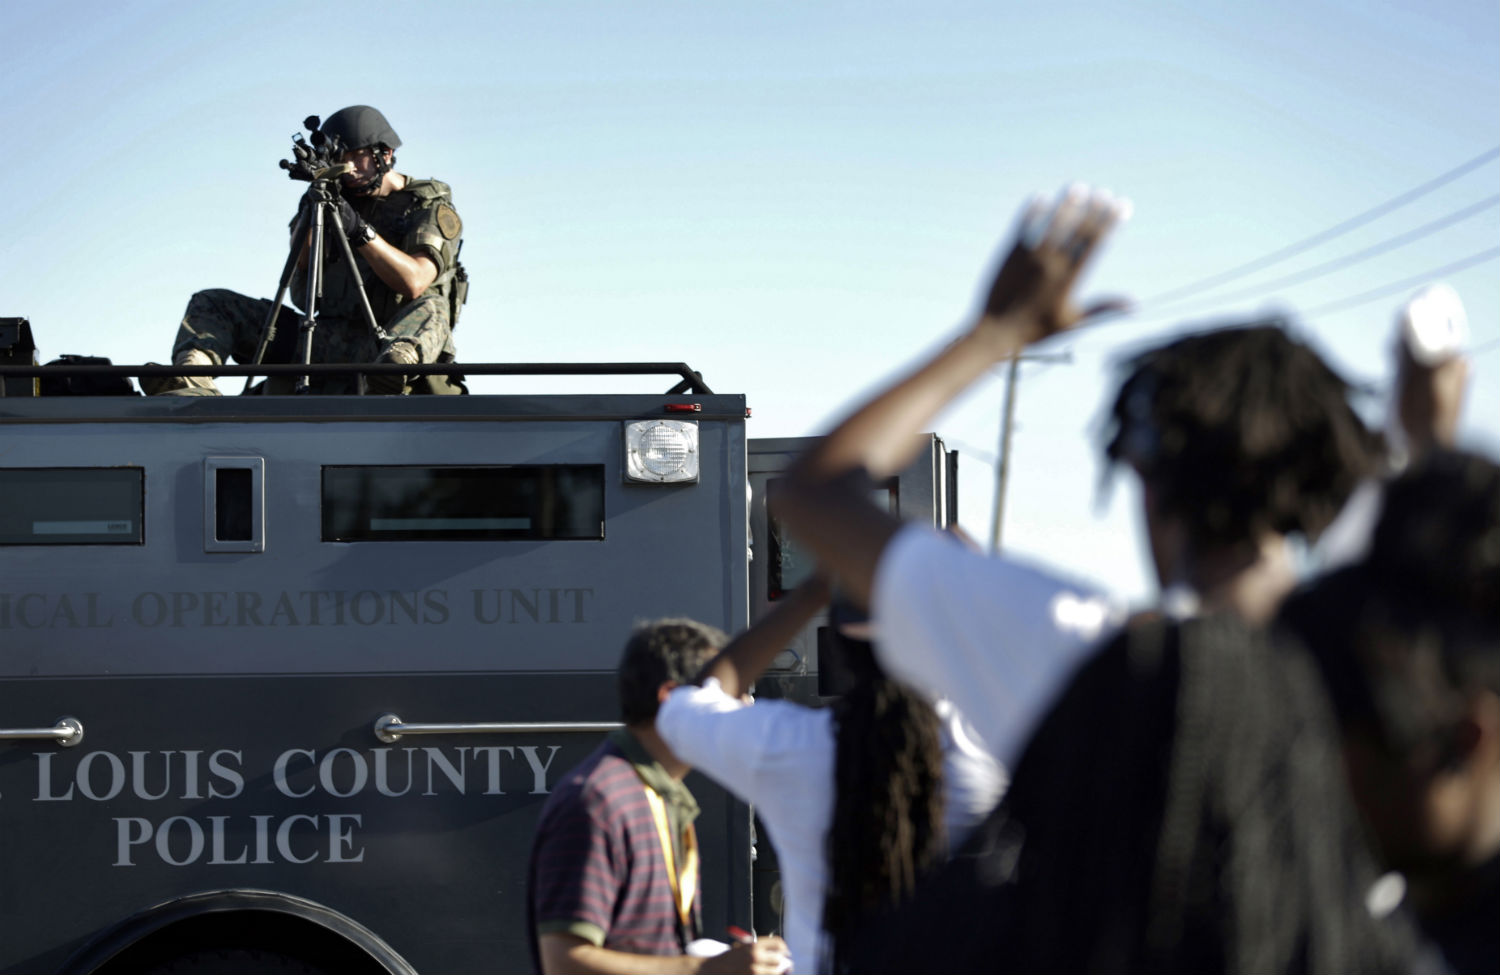 How to End Militarized Policing